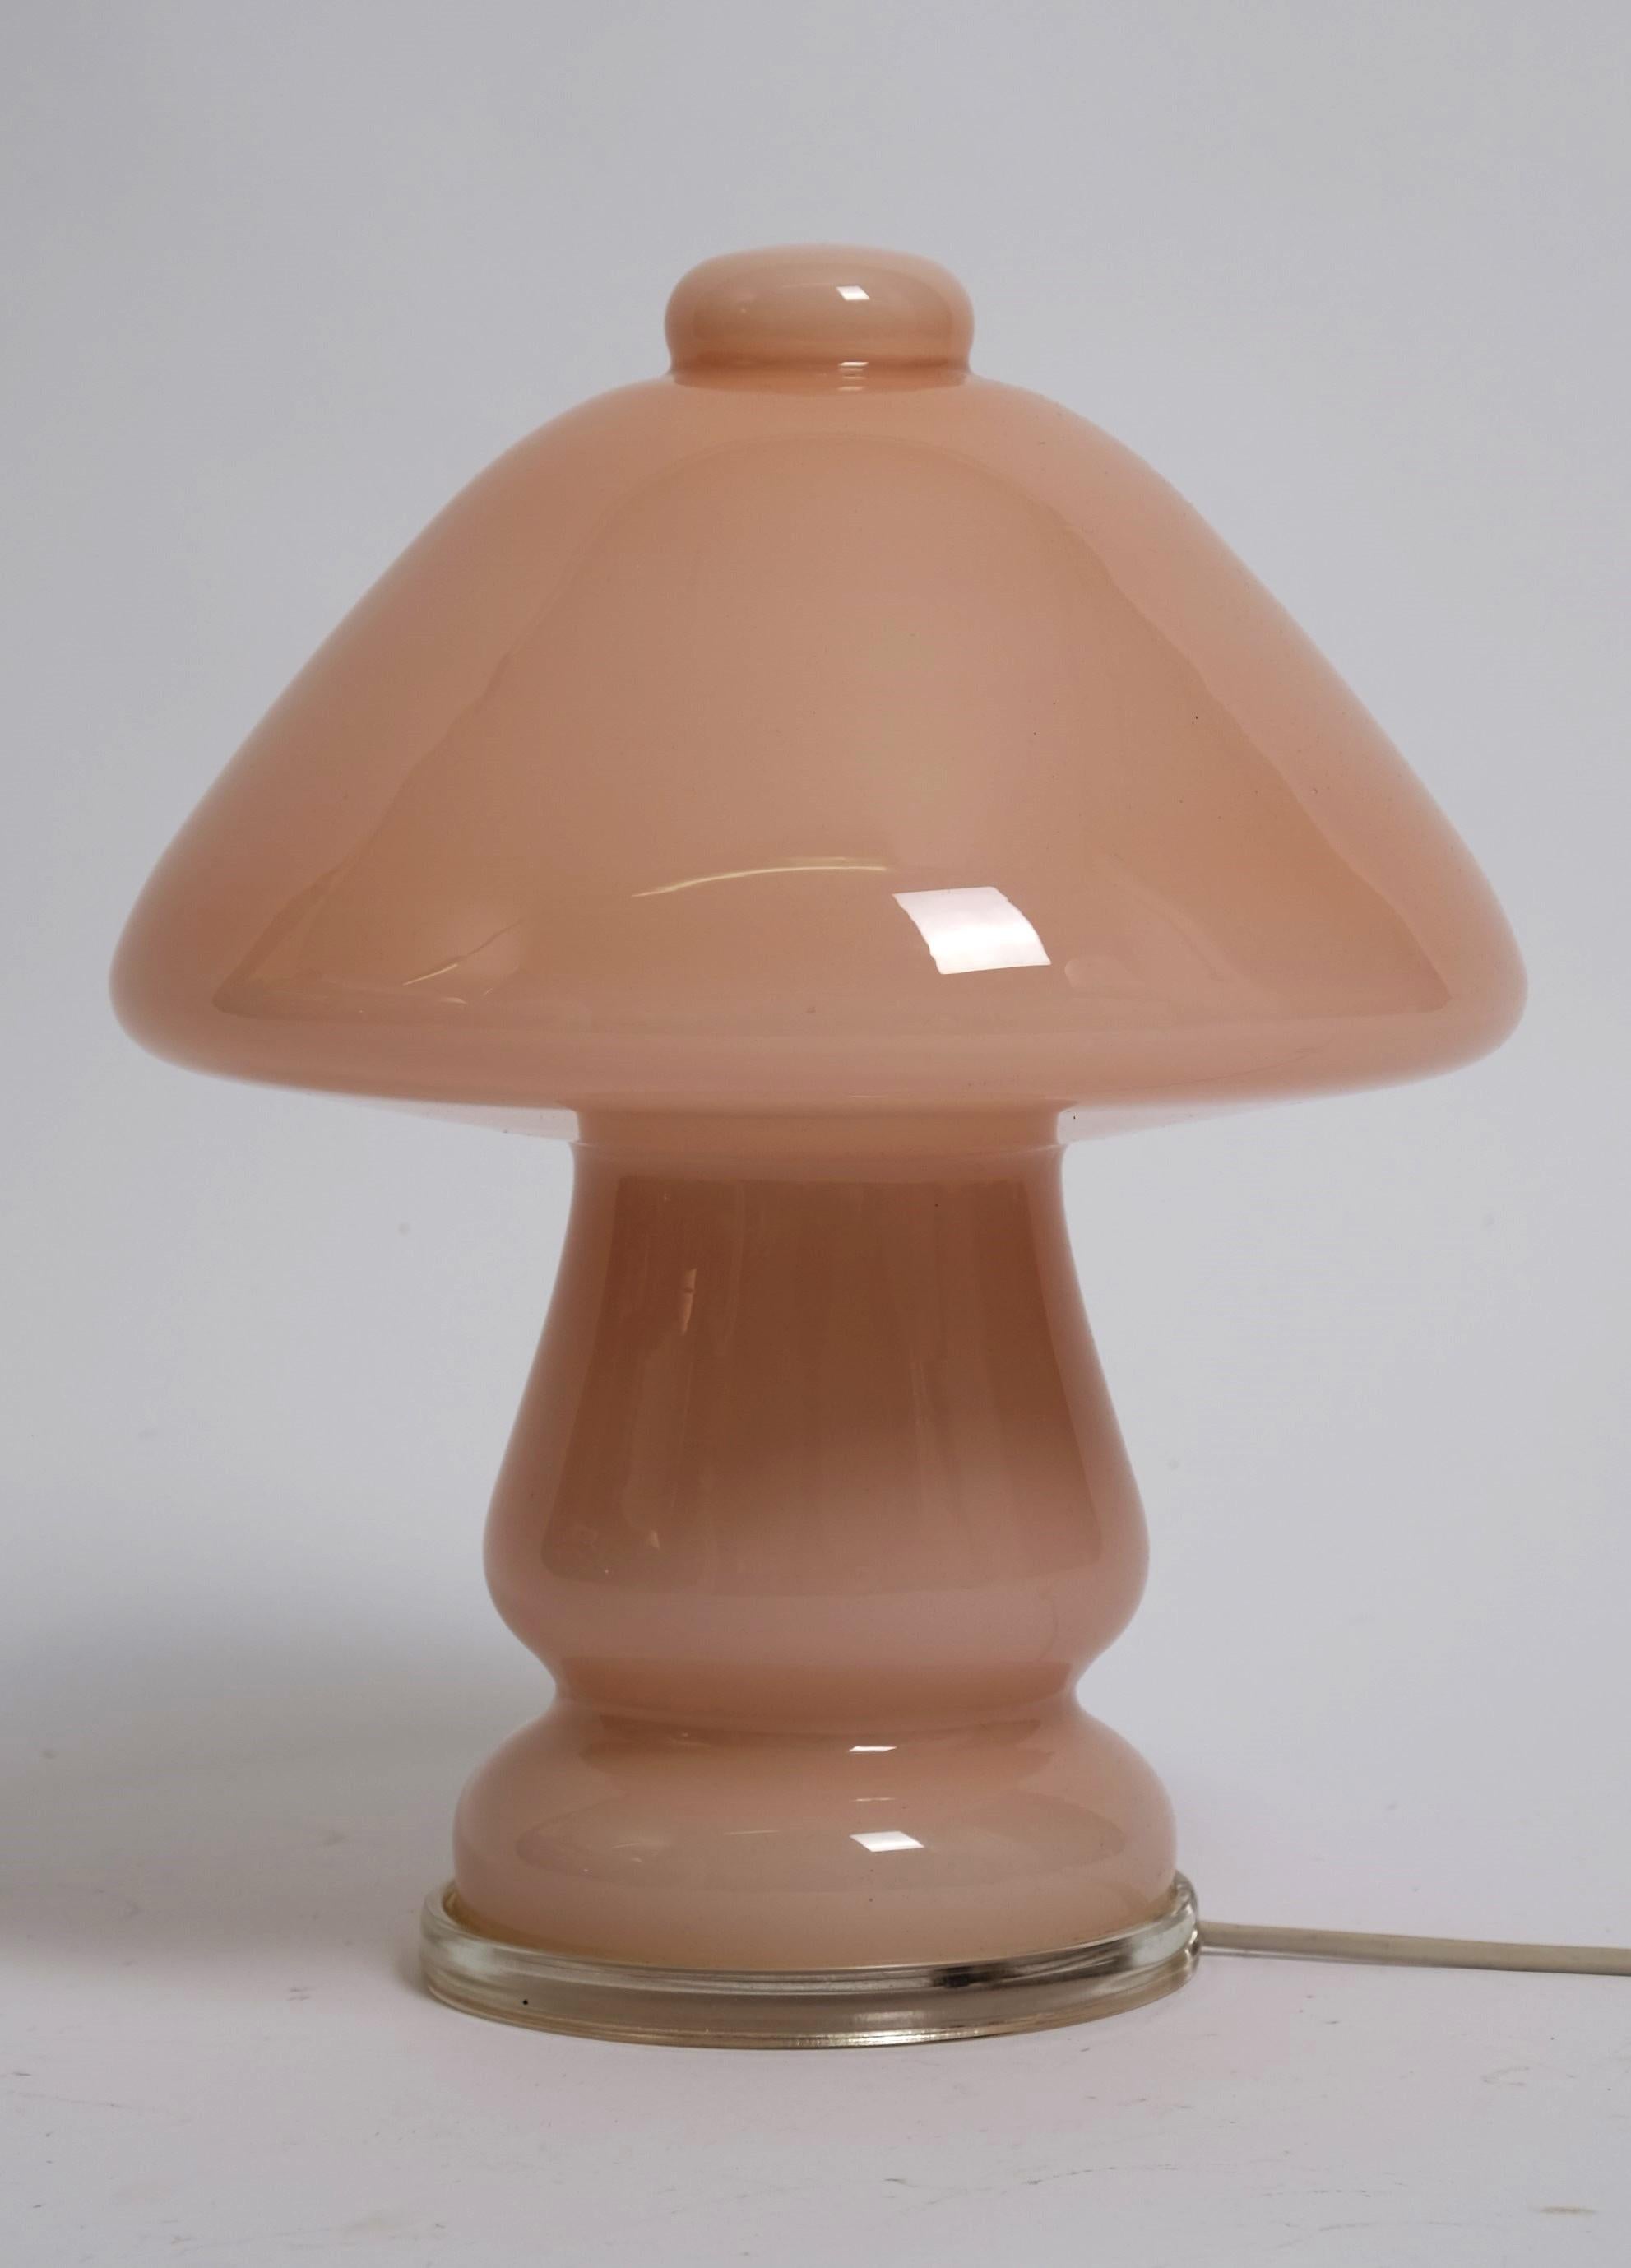 Rare mushroom-shaped table lamp made of thick-walled pink glass. This extraordinary table lamp was designed in Germany in the 1960s. 

The piece is in a wonderful vintage condition. No damage, no chipping, fully functional and 100% in original